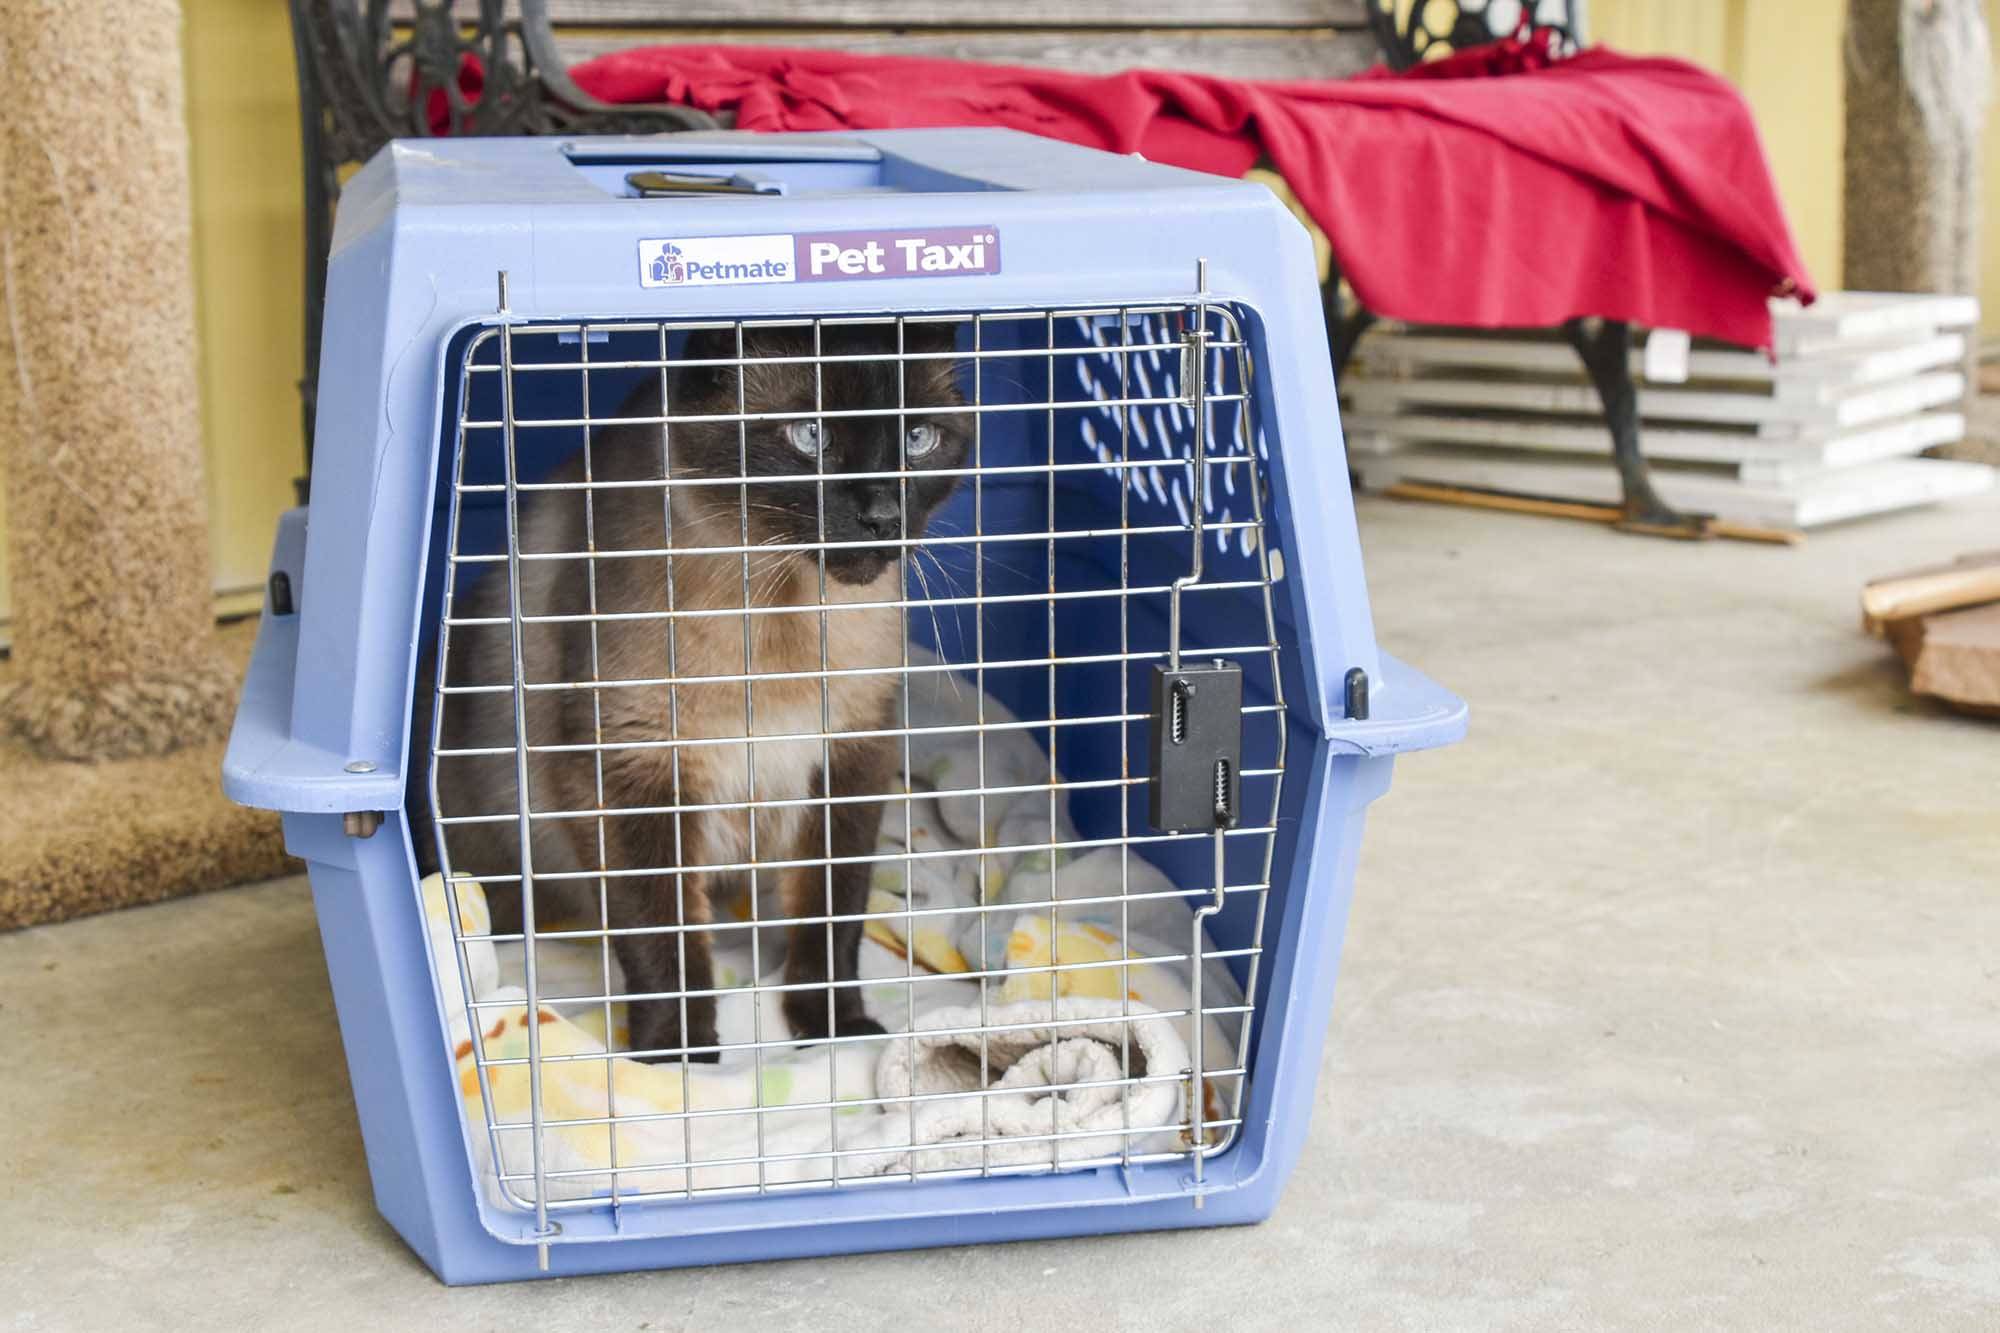 Arko takes his first look at the newly rebuilt “catio” at the Shuswap SPCA building in Salmon Arm on Tuesday, March 3, 2020. (Cameron Thomson - Salmon Arm Observer)